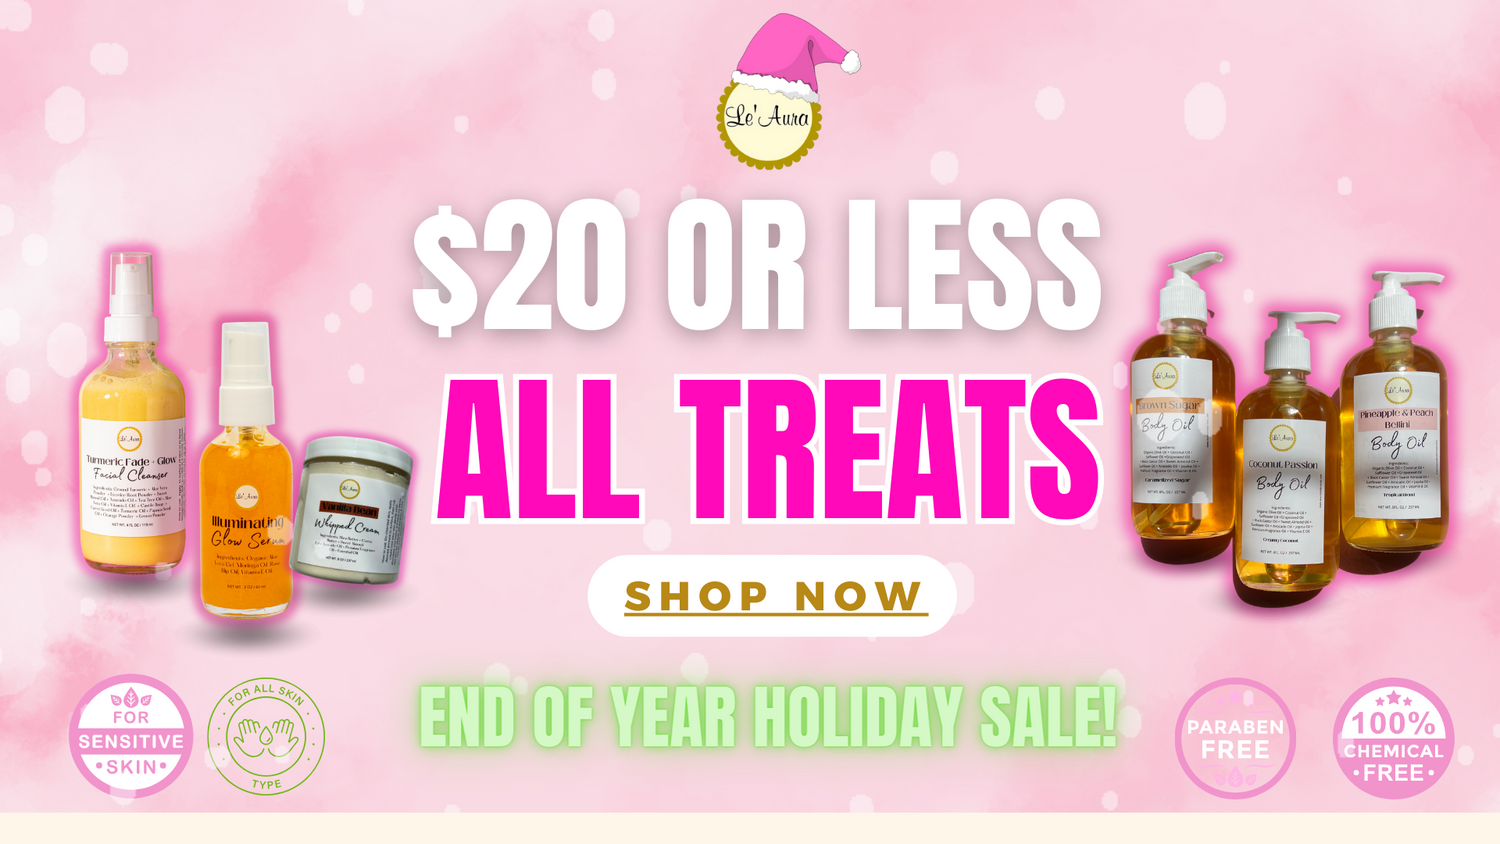 End of Year Holiday Sale